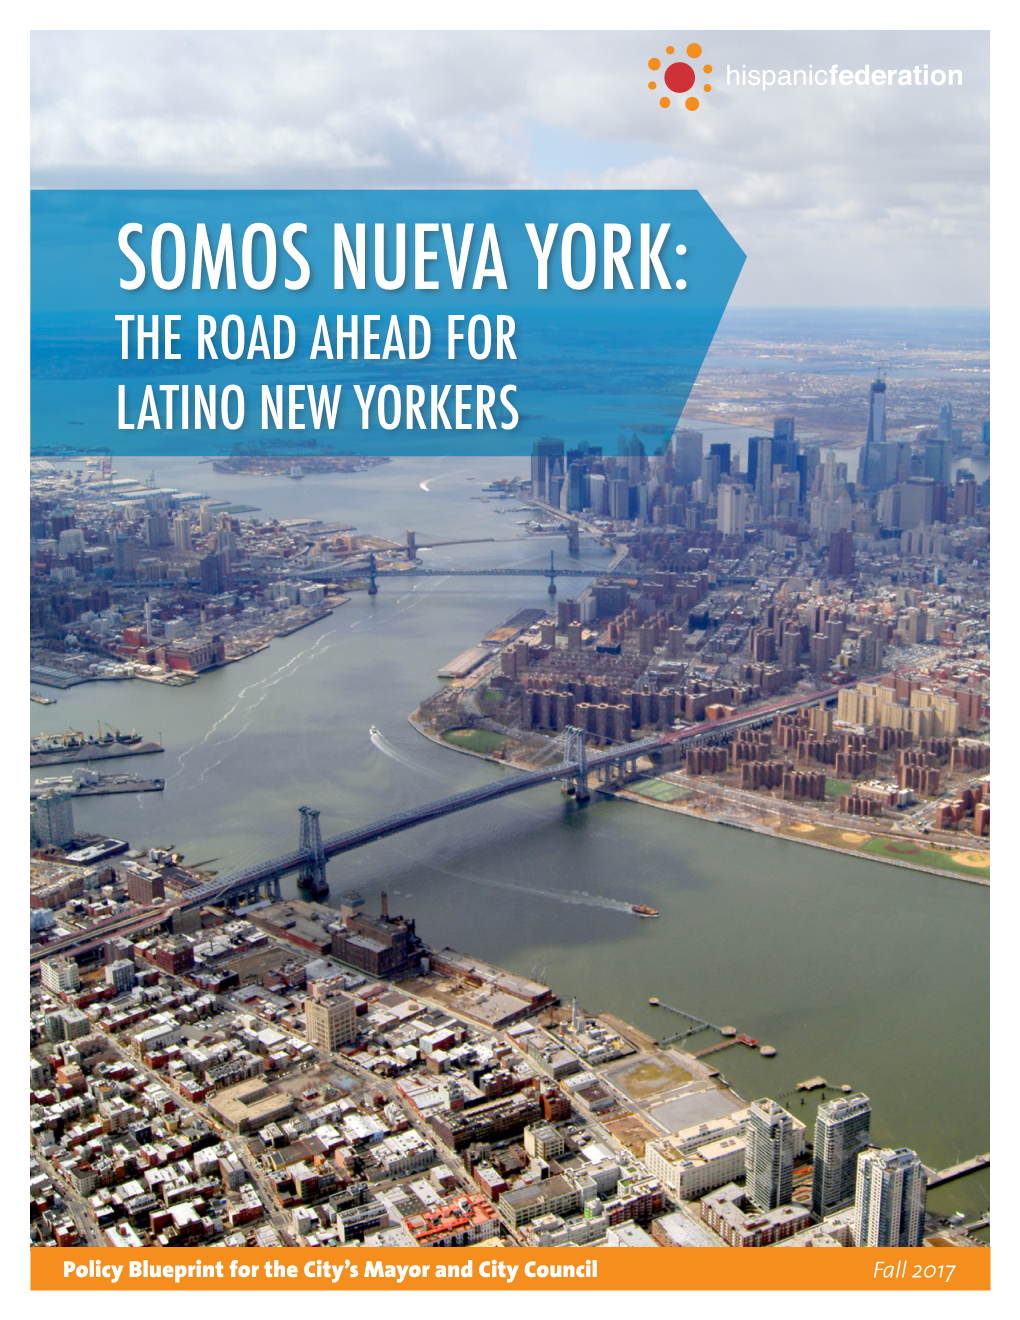 Somos Nueva York: the Road Ahead for Latino New Yorkers